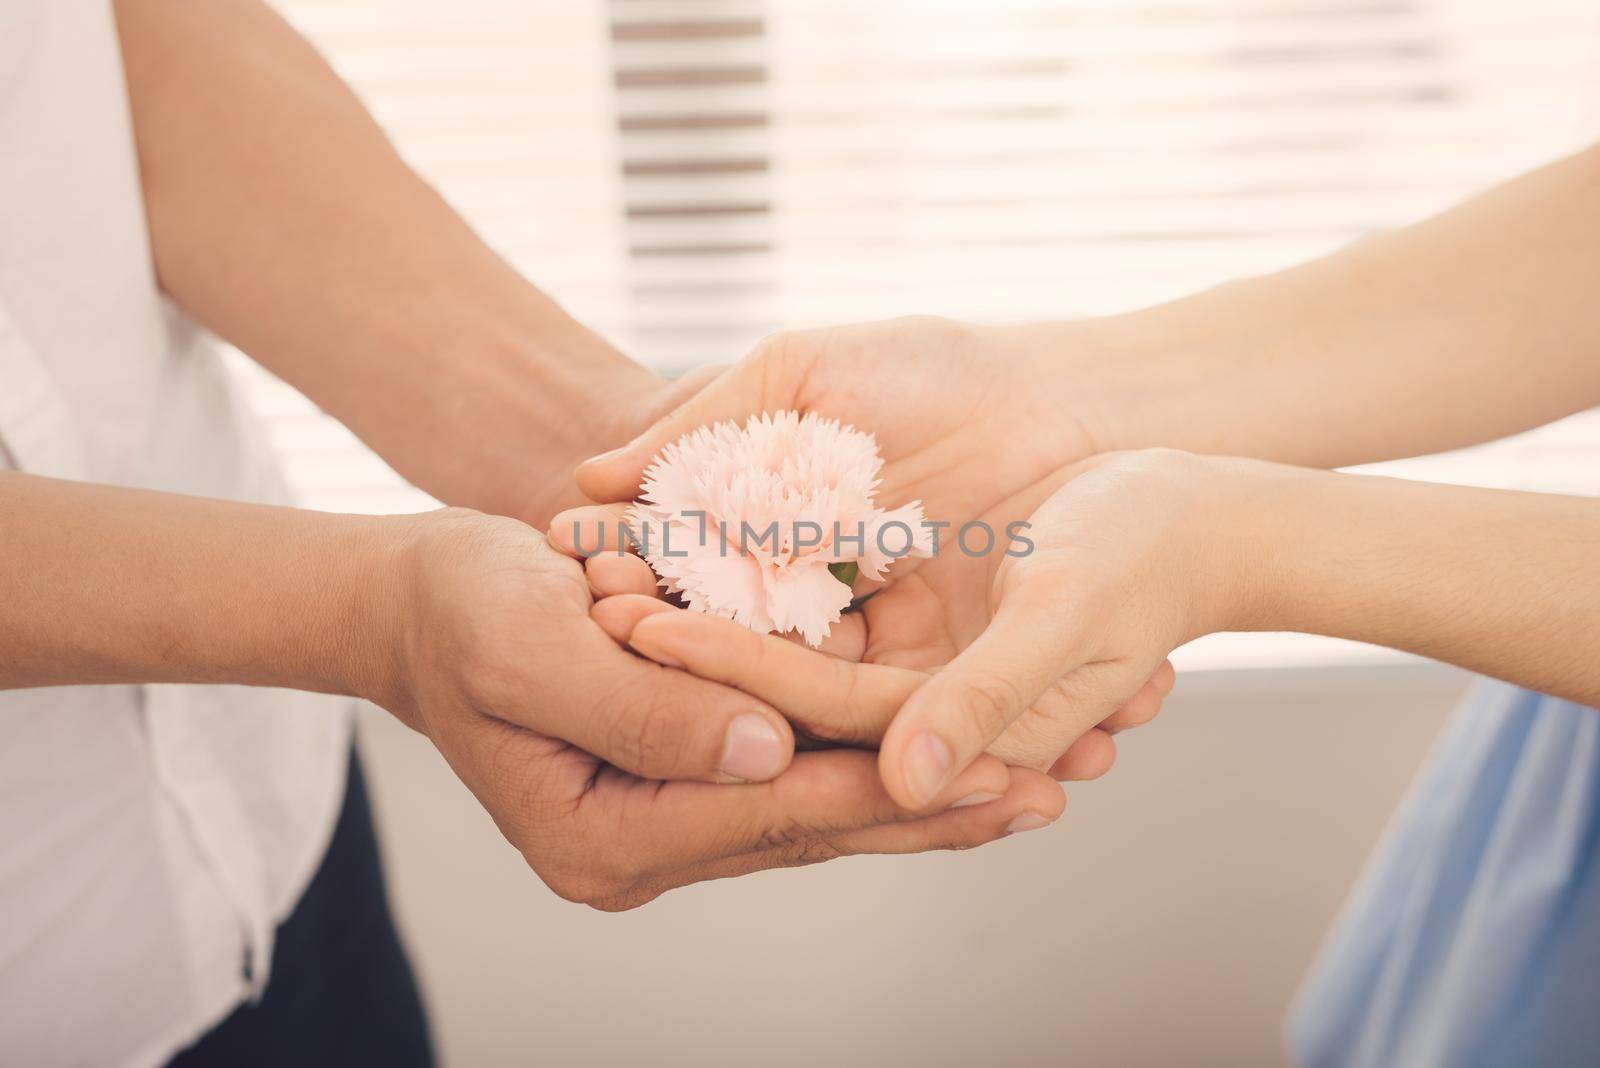 Couple in love. Man and woman hand over pink flower